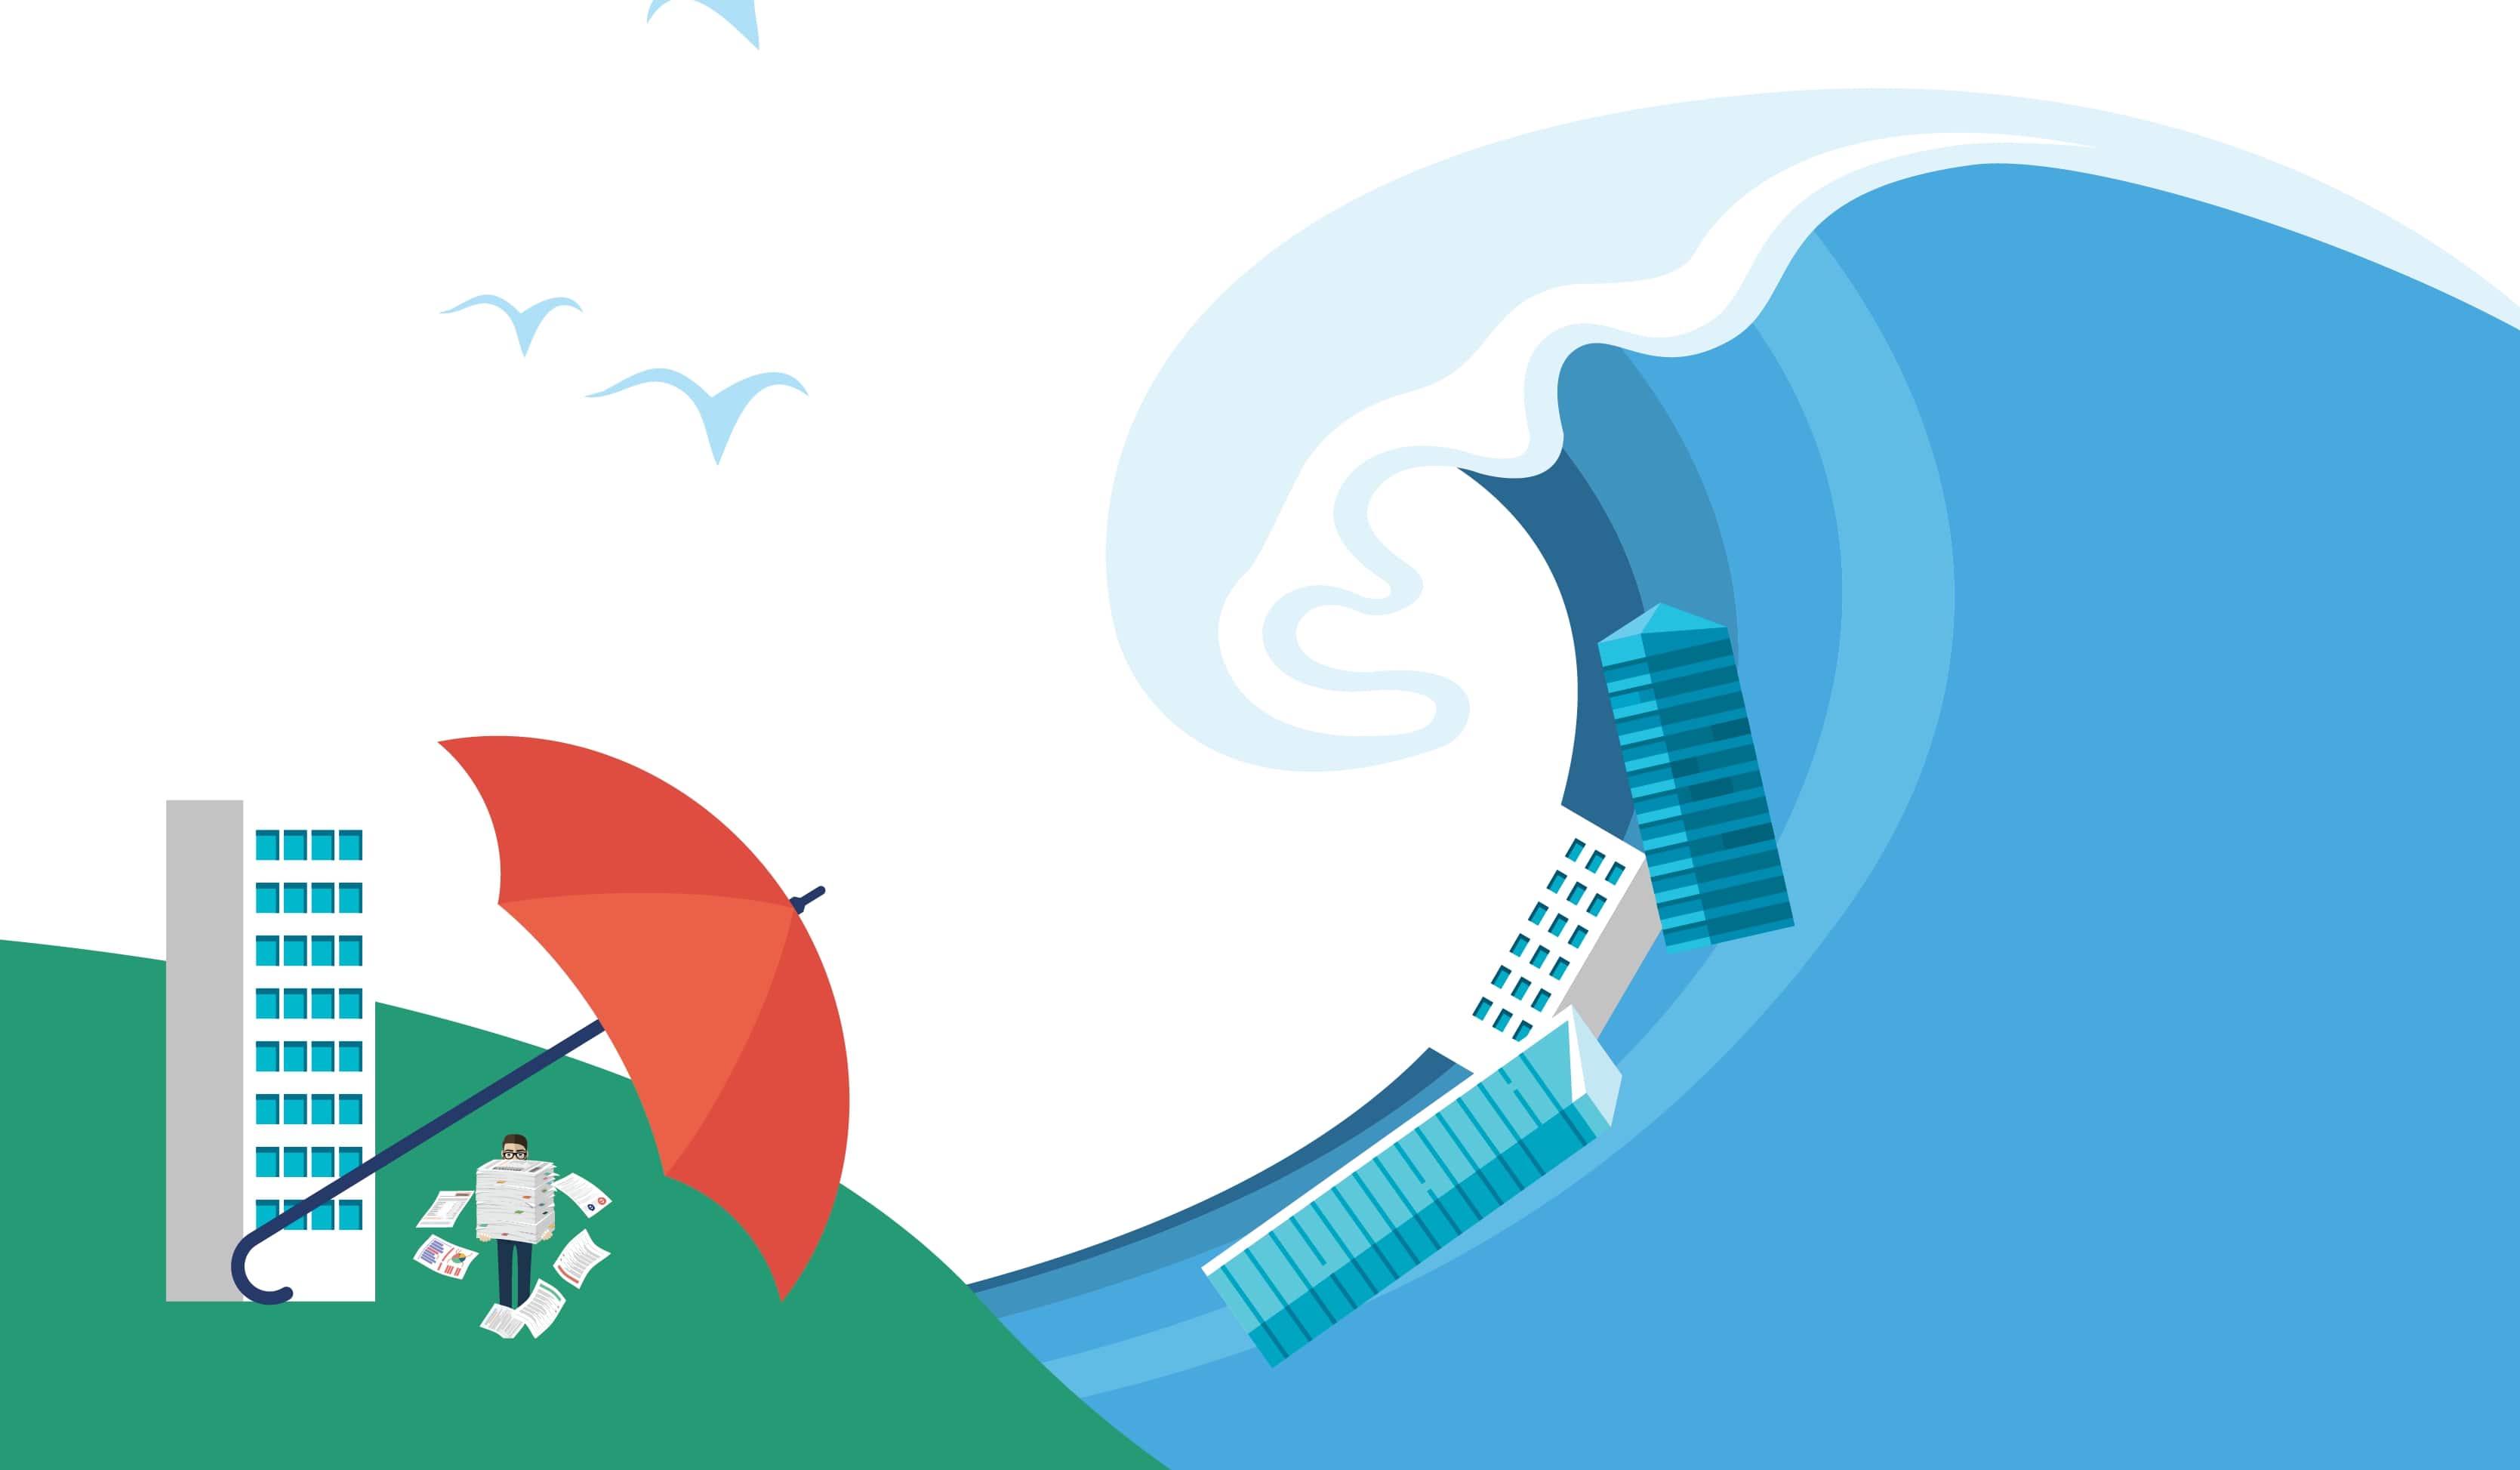 infographic-resources-the-impending-vendor-risk-management-tsunami.png